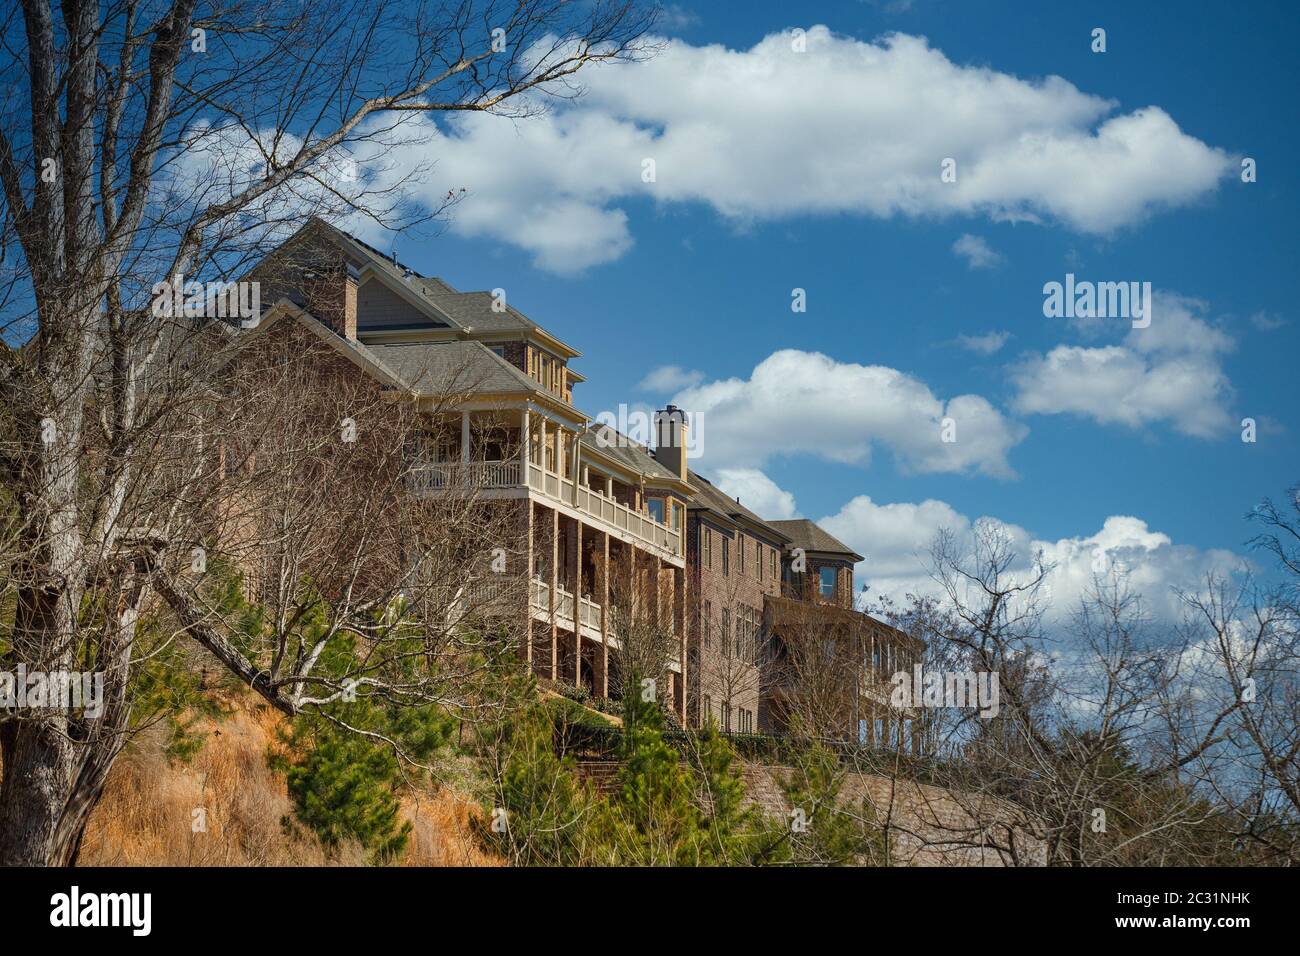 Two large brick homes with verandas on a hilltop under clear blue skies Stock Photo